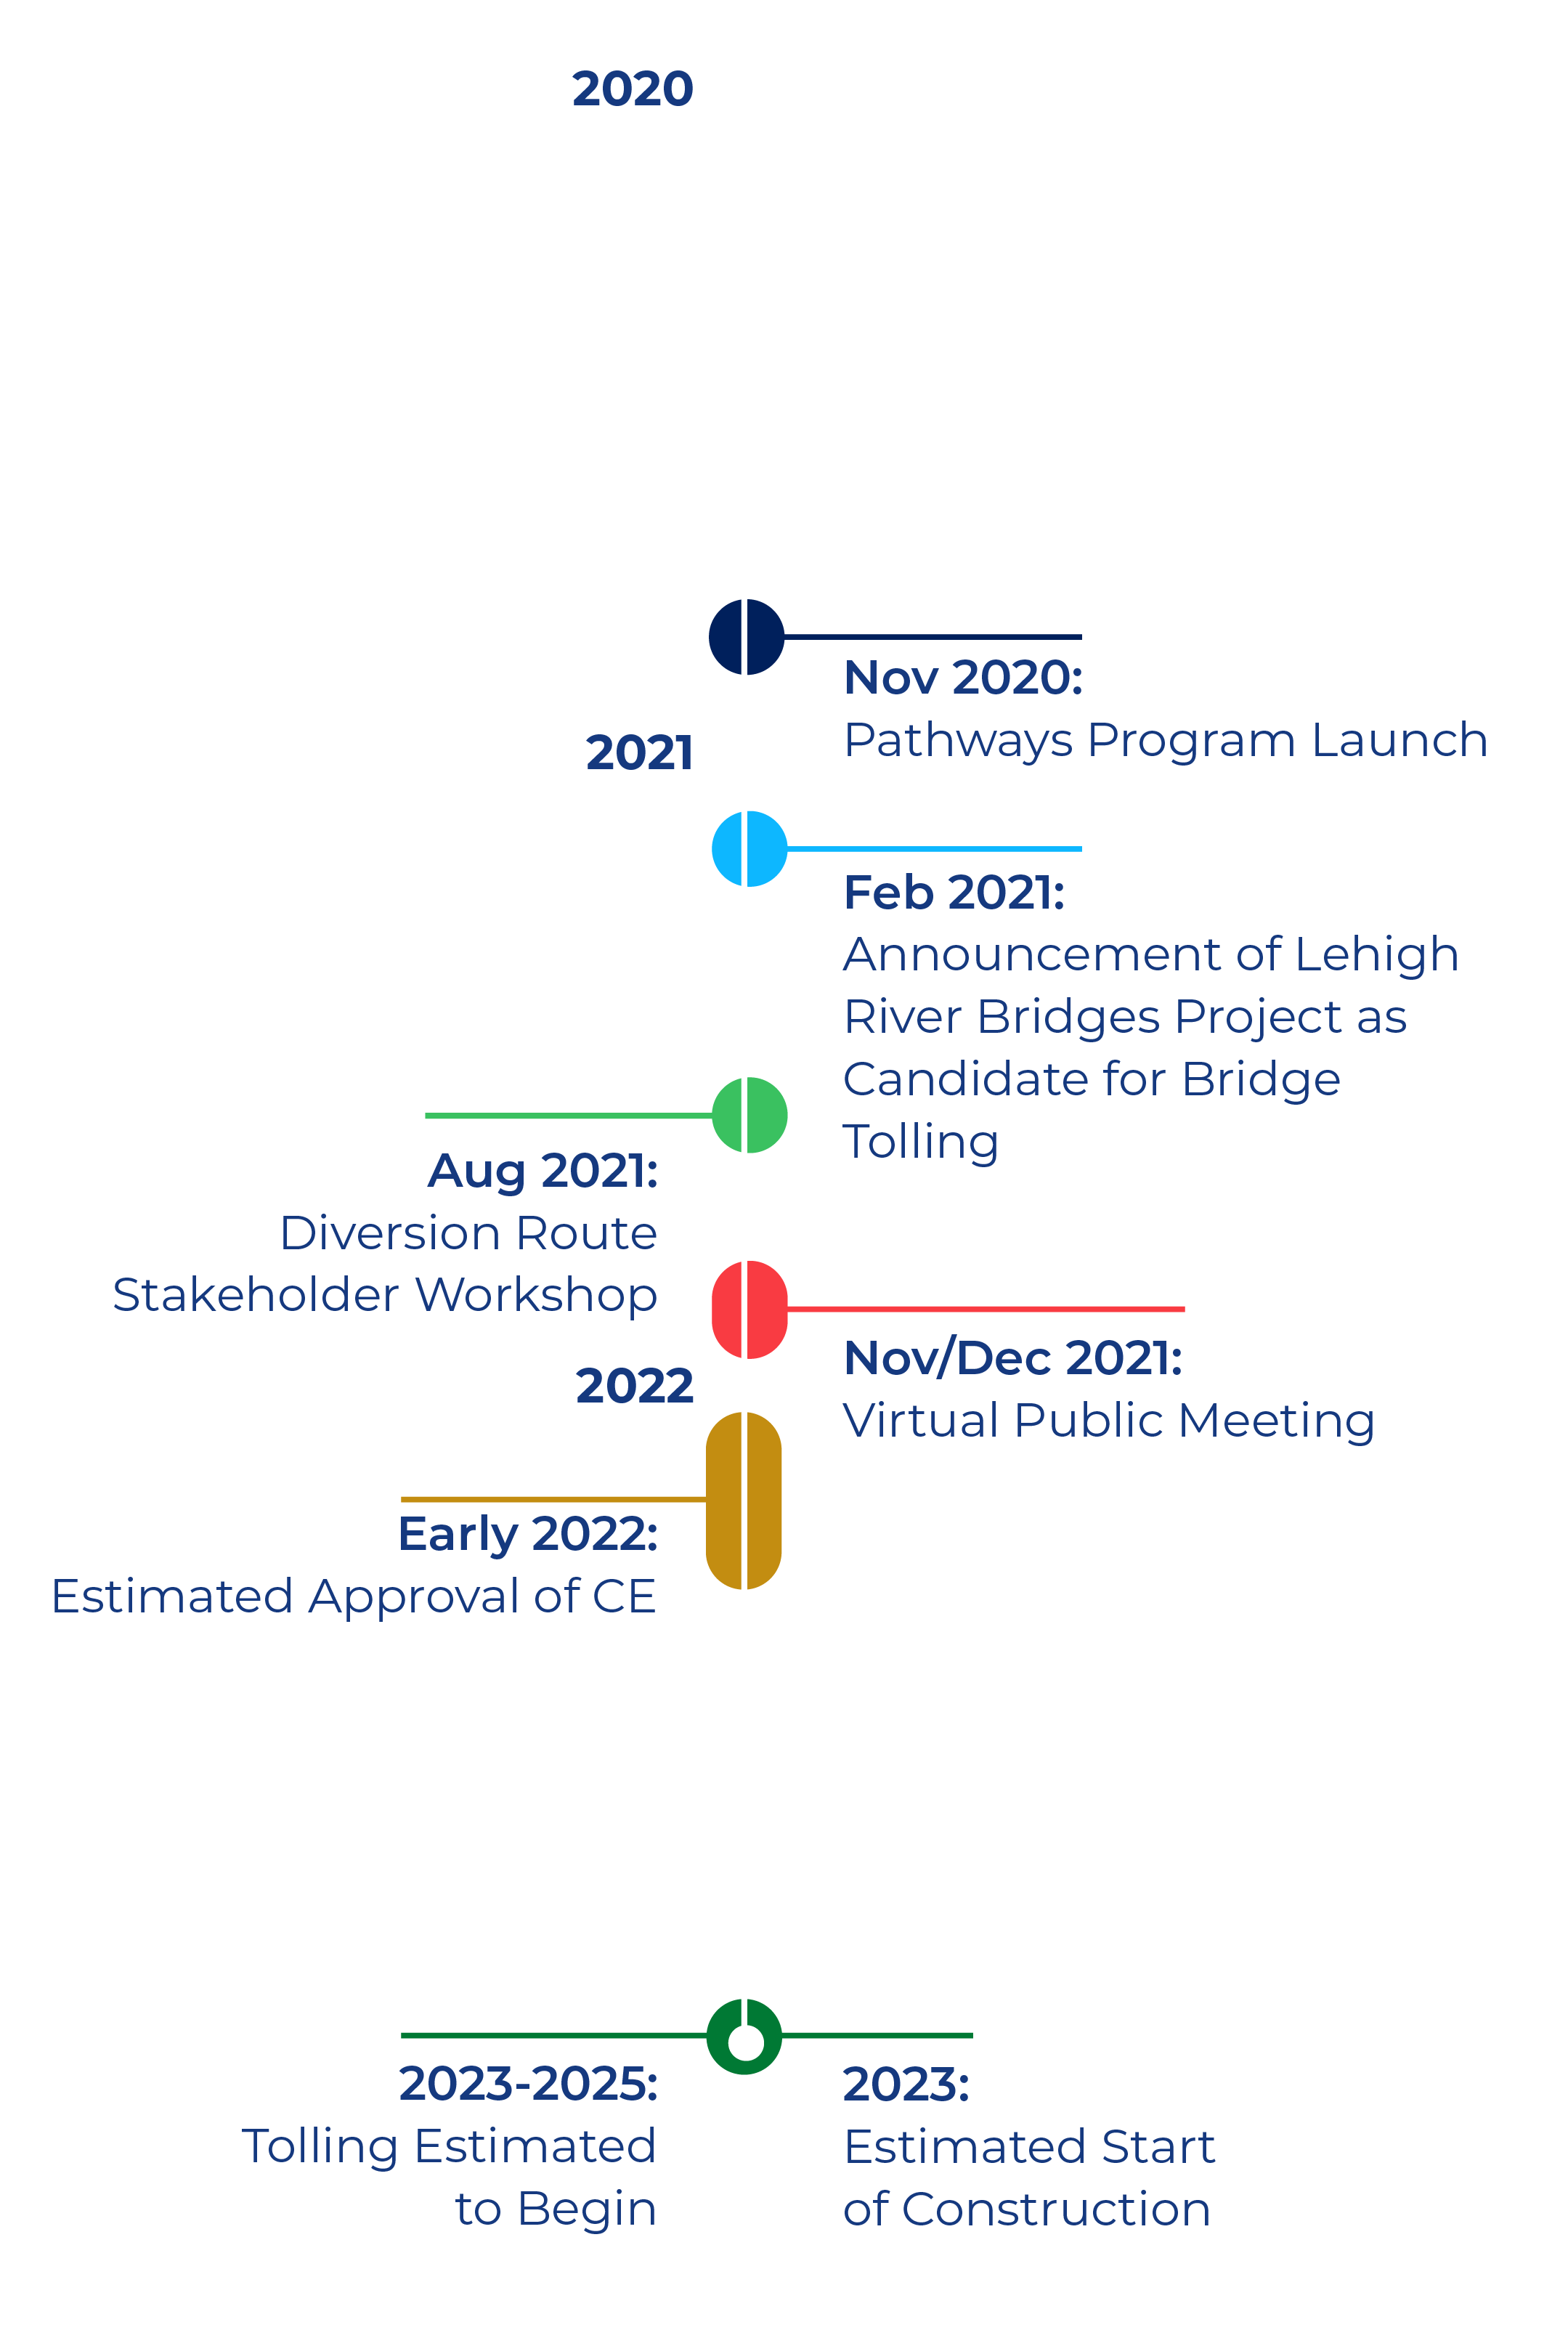 Timeline: Pathways Program launches in November 2020. Announcement of I-80 Lehigh River Bridges Project as a candidate for bridge tolling in February 2021. Diversion route stakeholder workshop in August 2021. Virtual public meeting in November-December 2021. Estimated approval of CE in early 2022. Estimated start of construction in 2023. Tolling estimated to begin in 2023-2025.